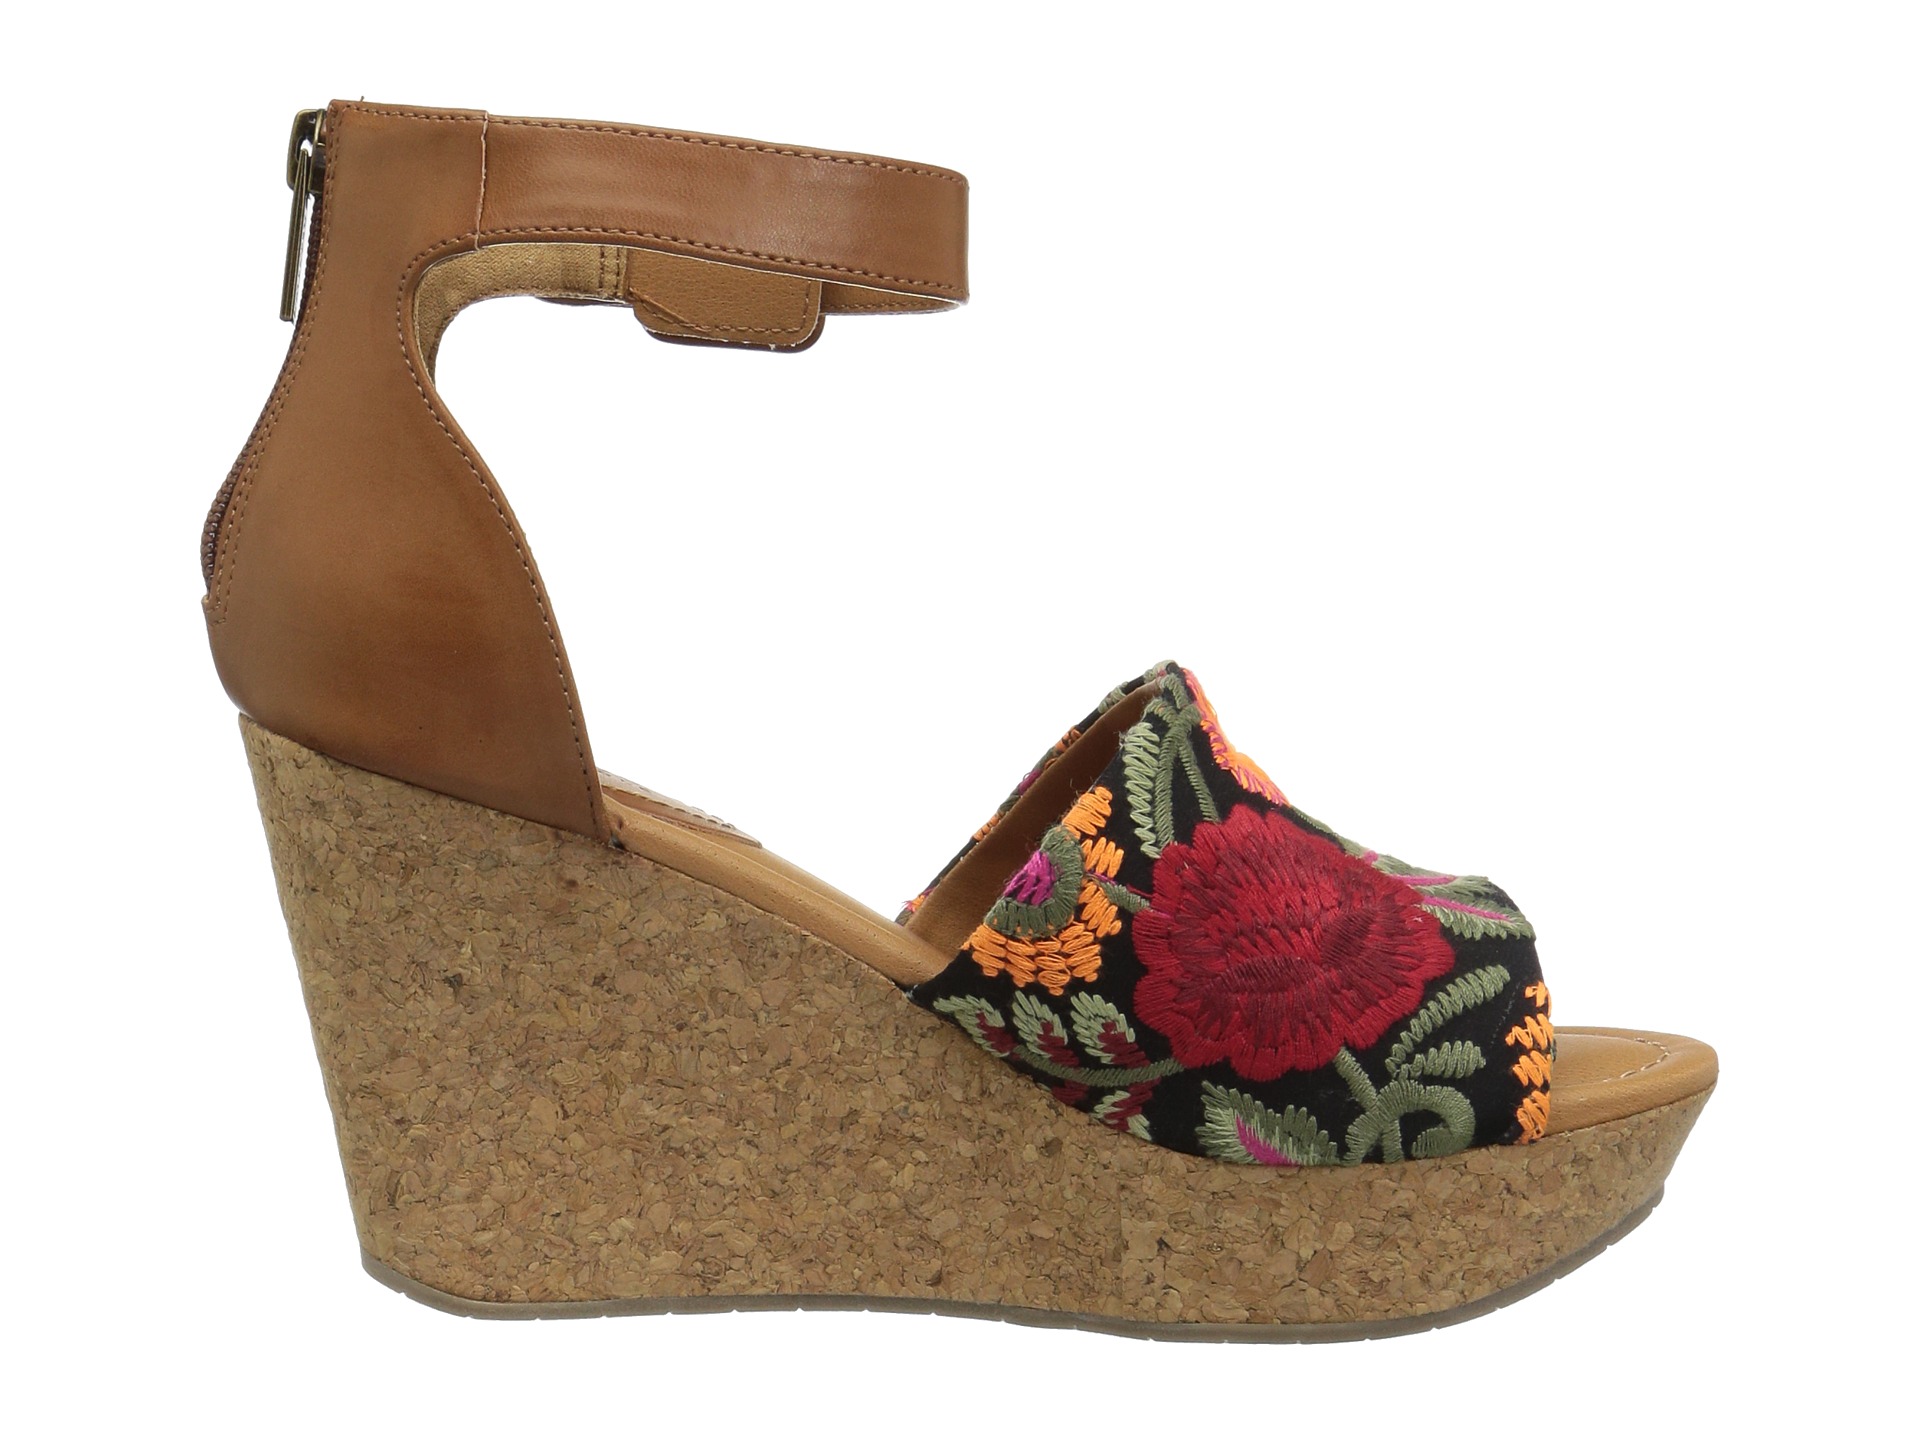 Kenneth Cole Reaction Sole Quest Floral Embroidered - Zappos.com Free ...